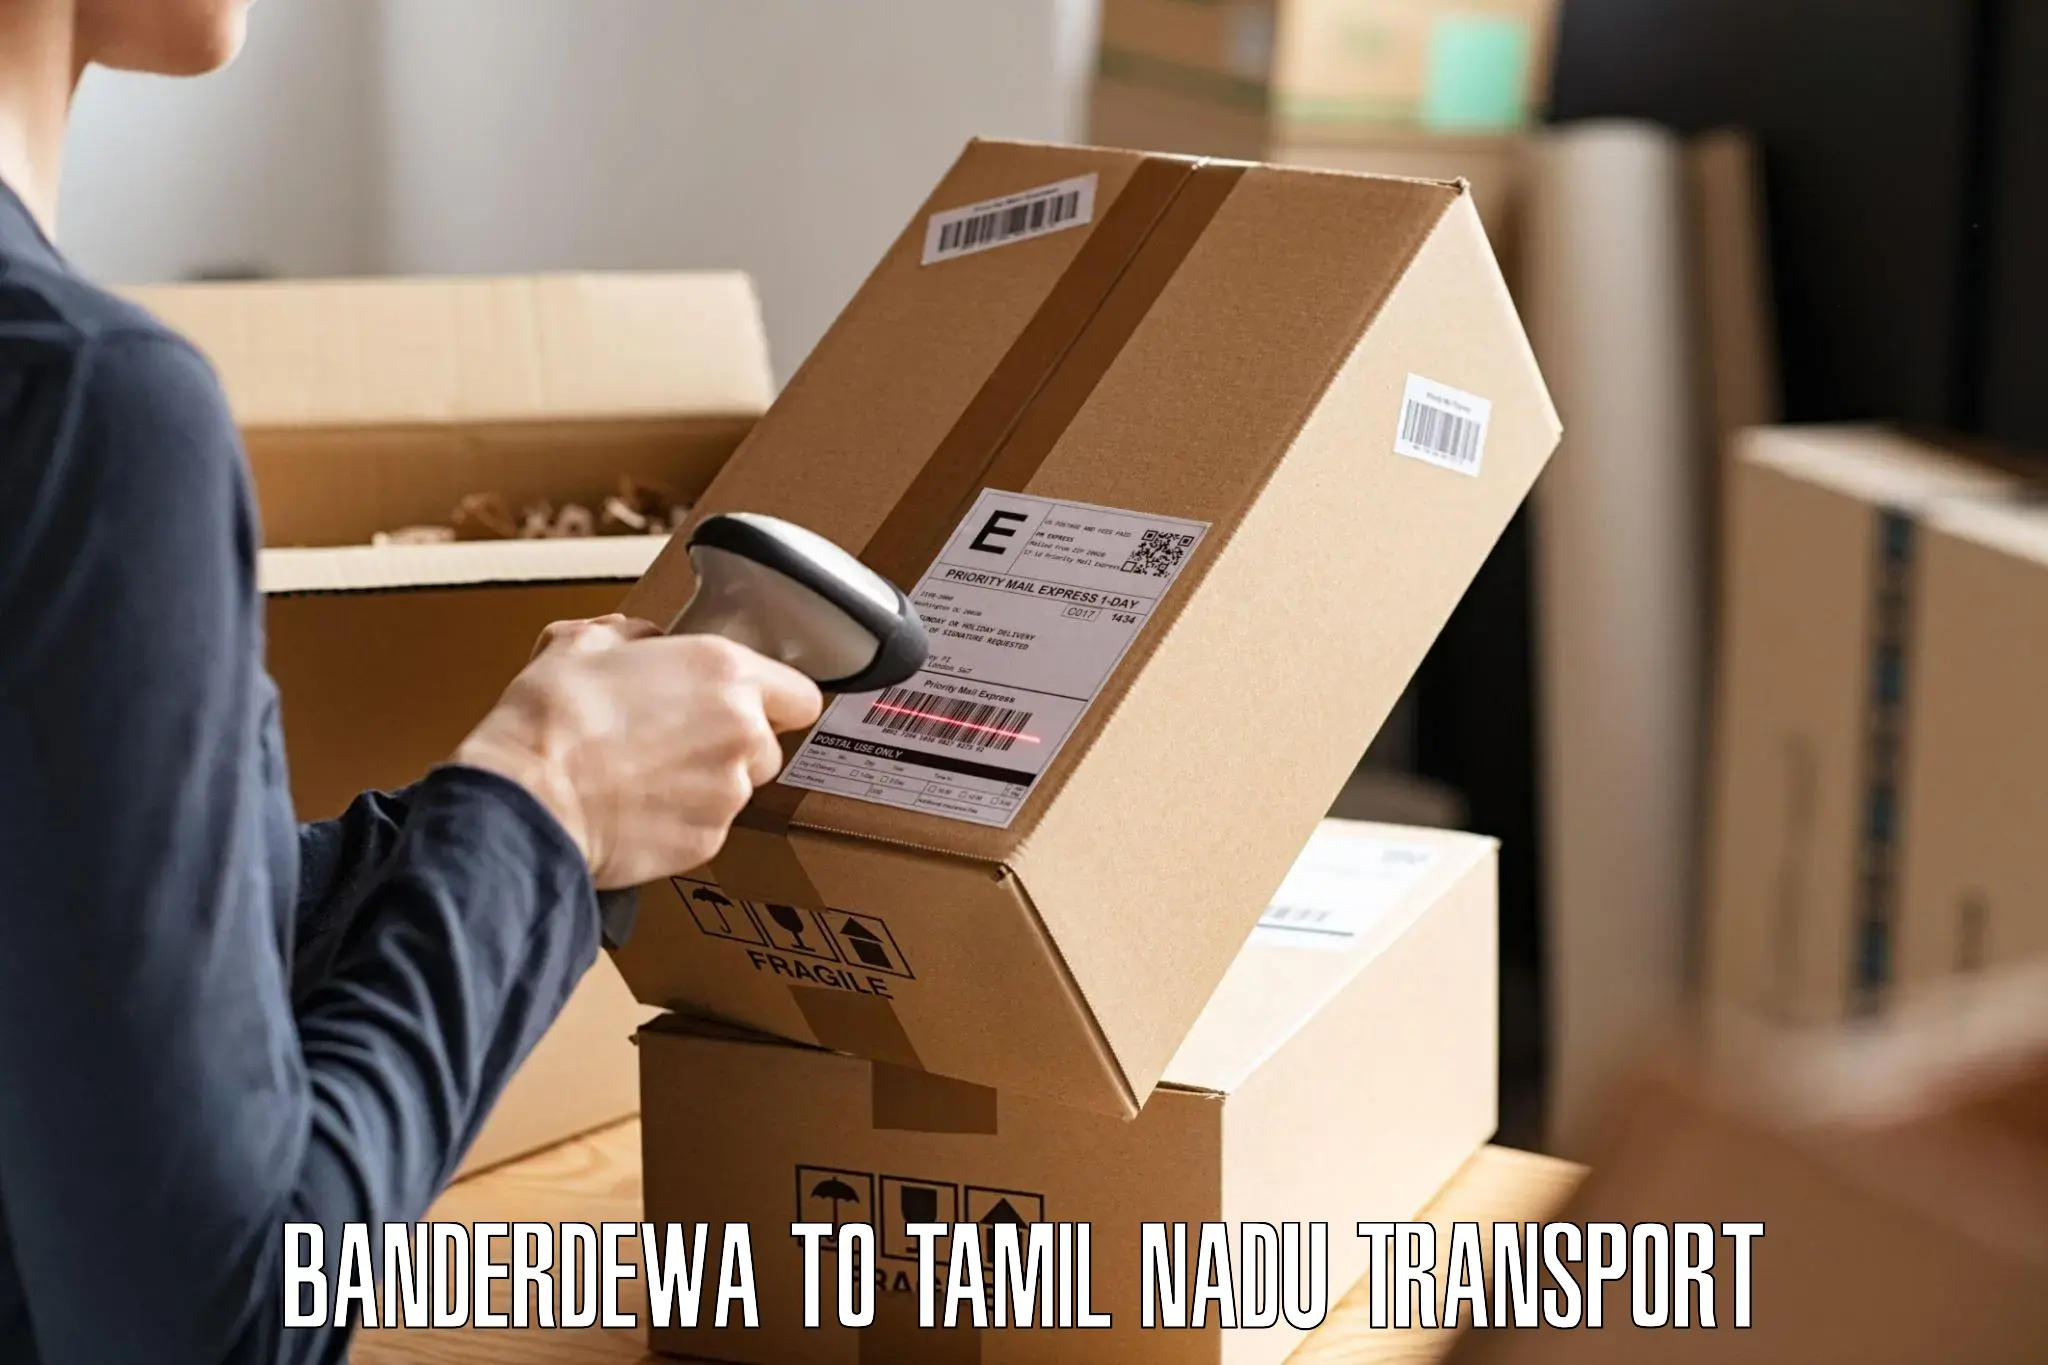 Truck transport companies in India in Banderdewa to Meenakshi Academy of Higher Education and Research Chennai